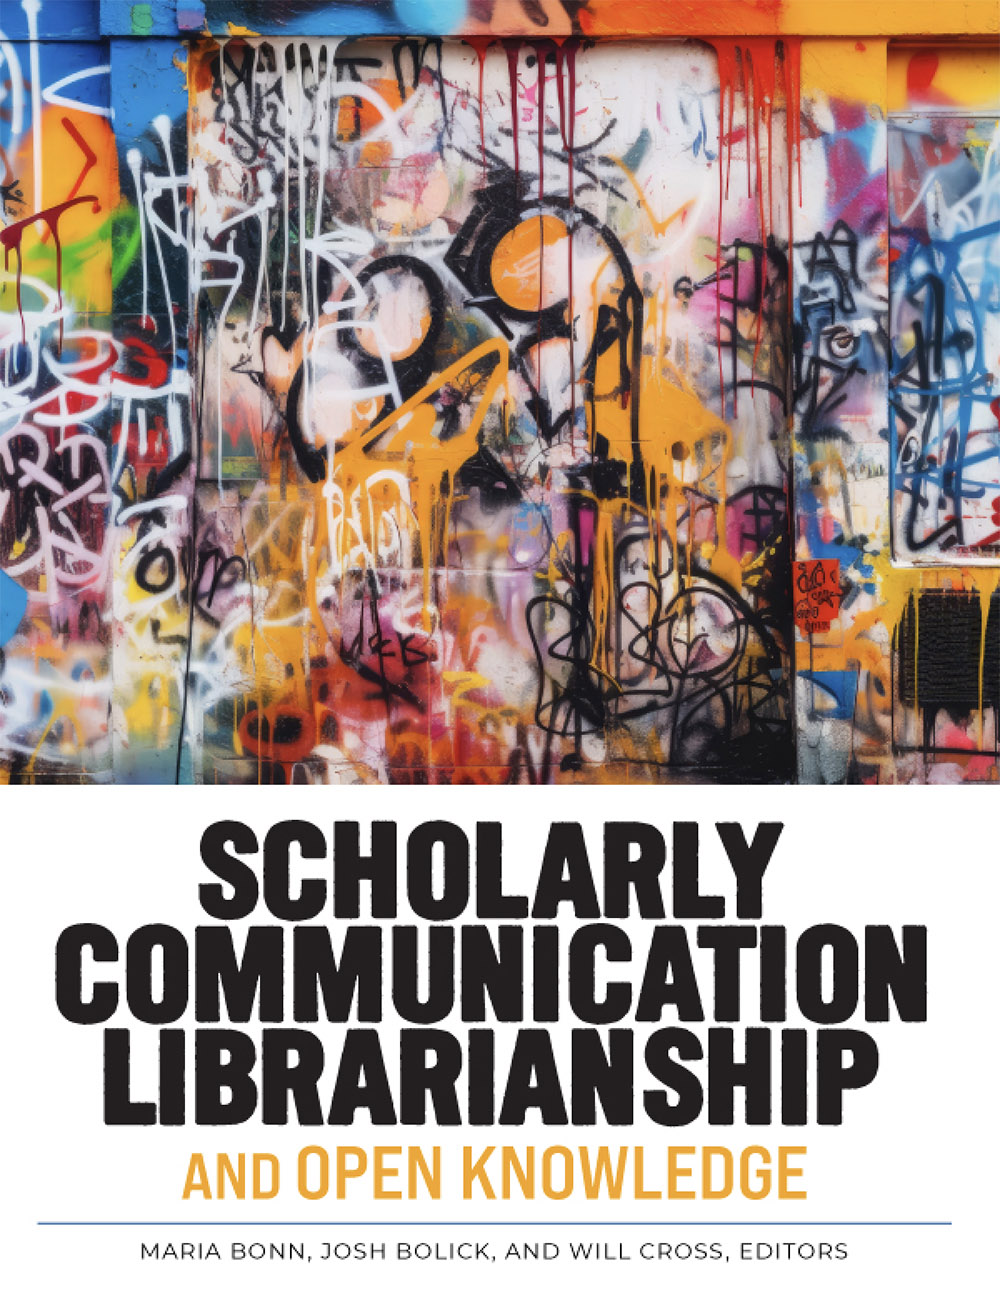 “Scholarly Communication Librarianship and Open Knowledge"